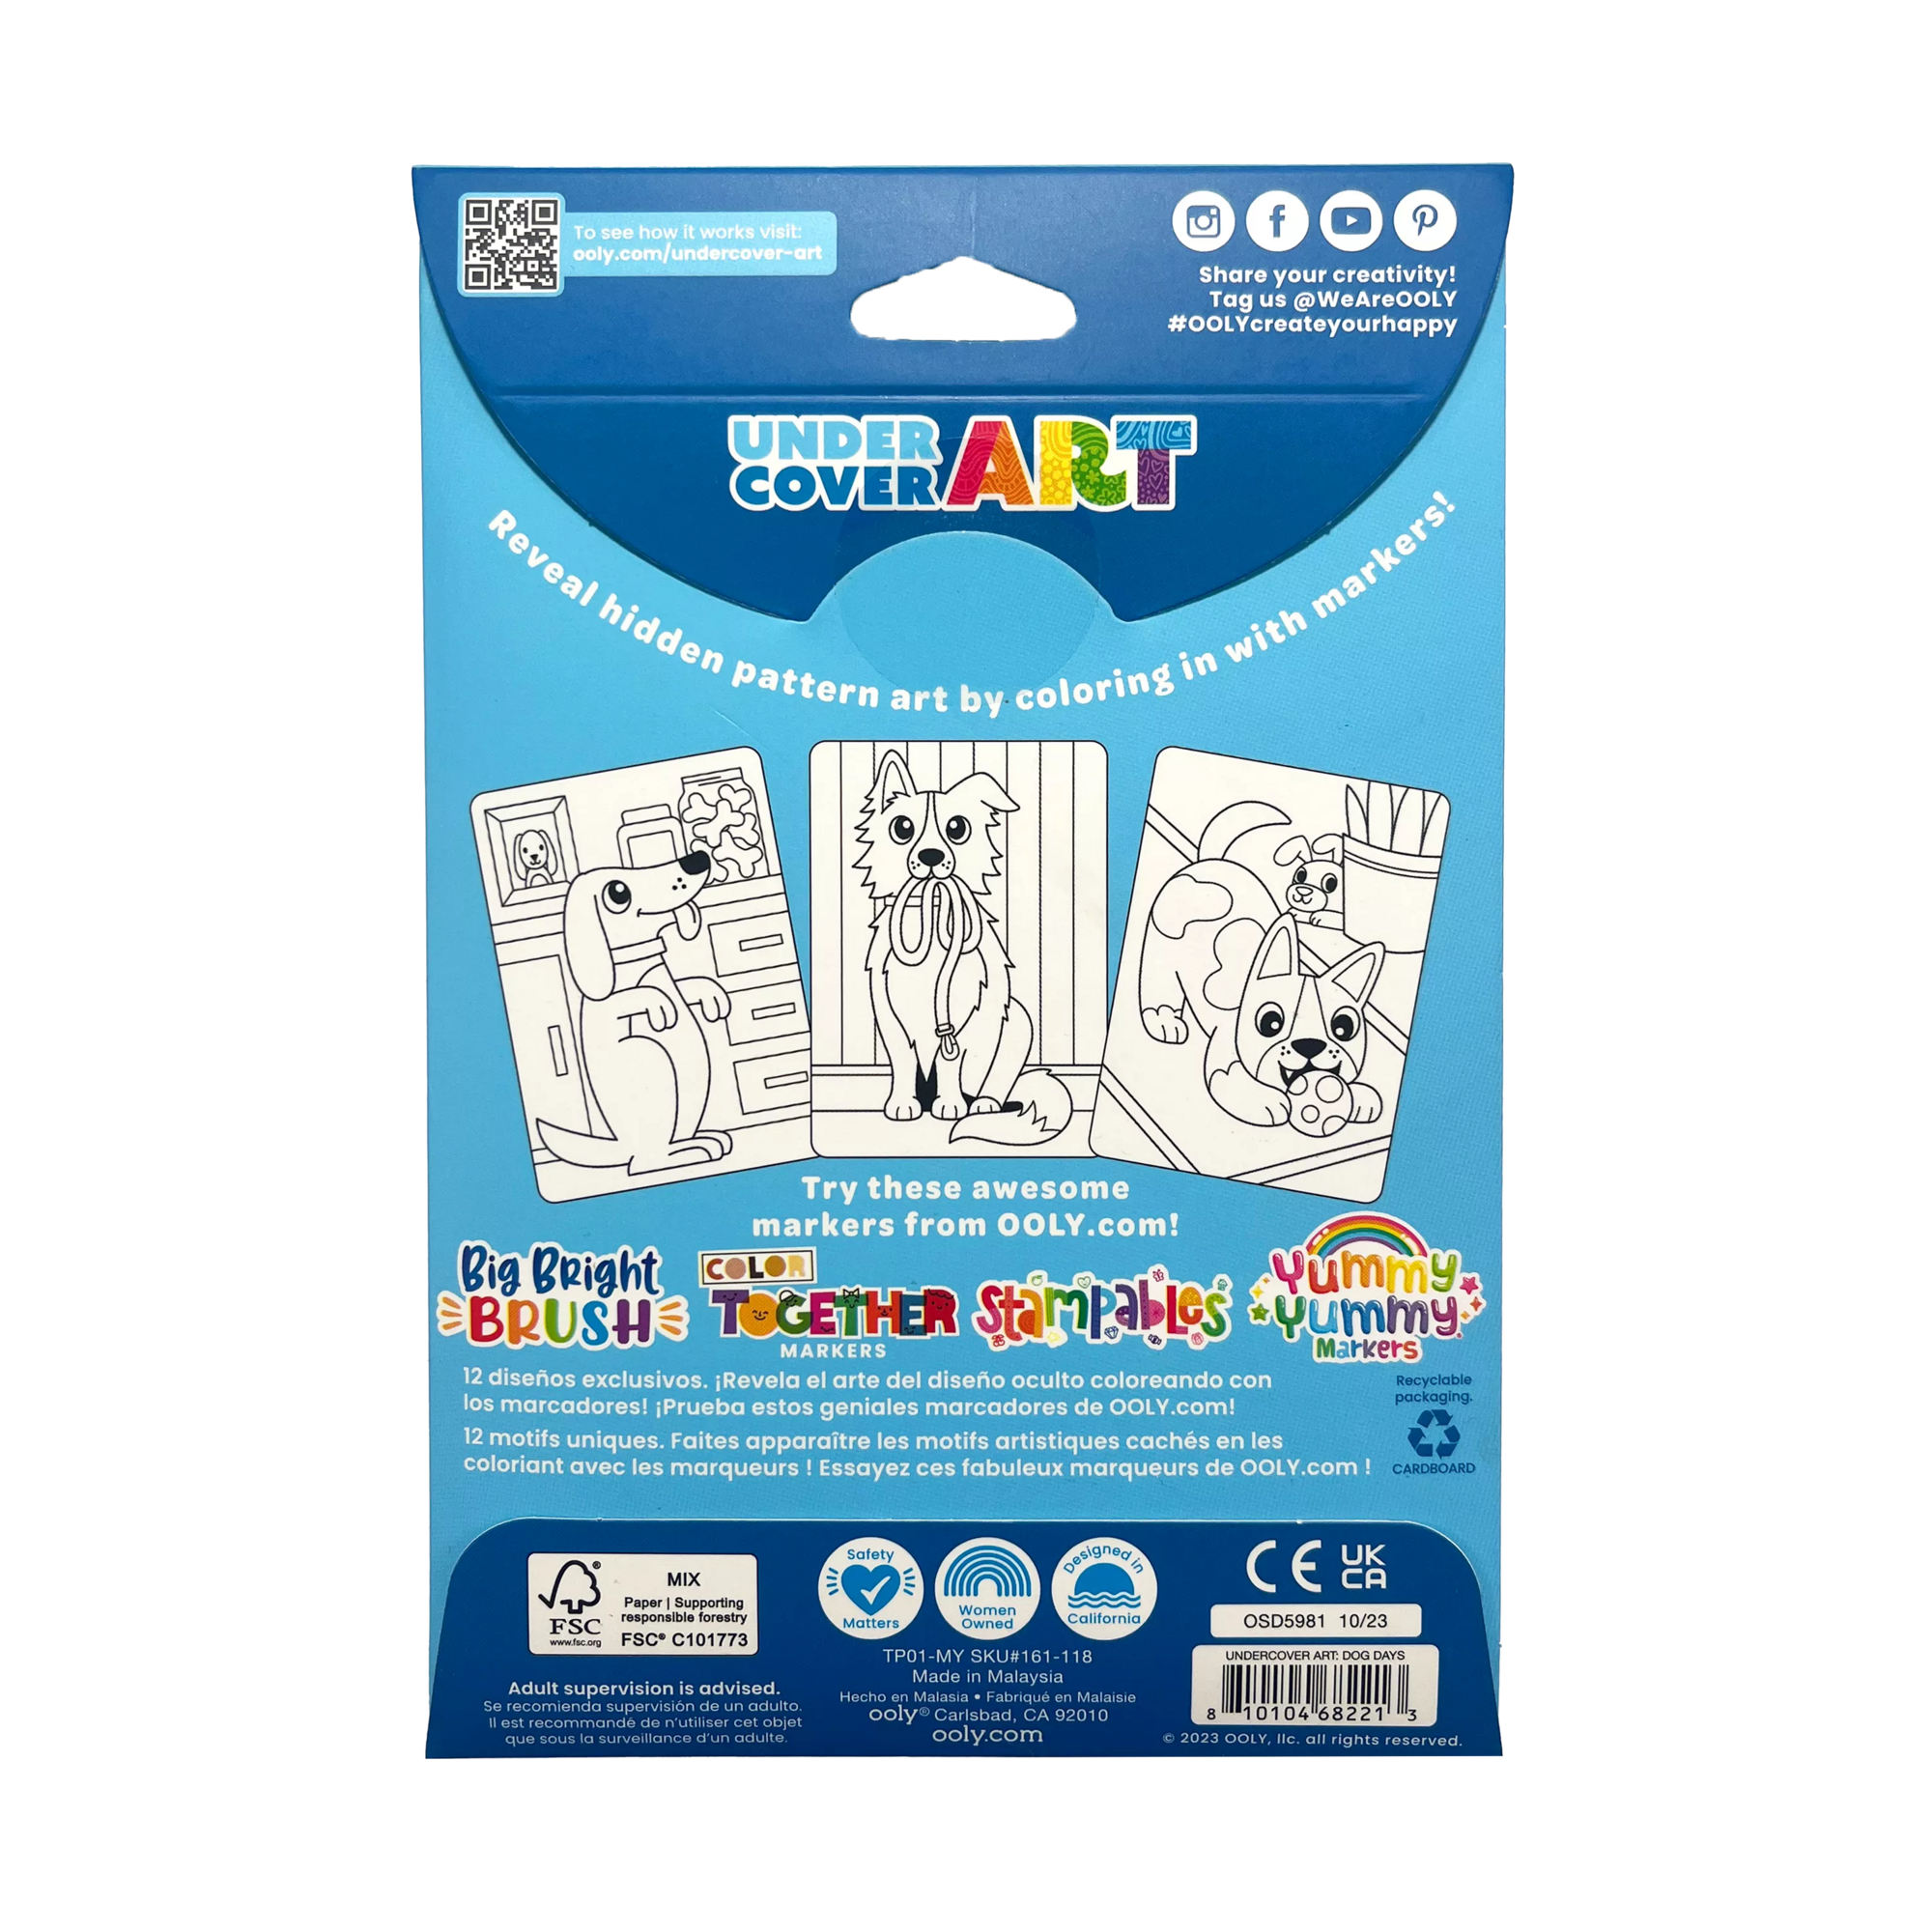 Undercover Art Hidden Pattern Coloring Activity Art Cards - Dog Days back of packaging